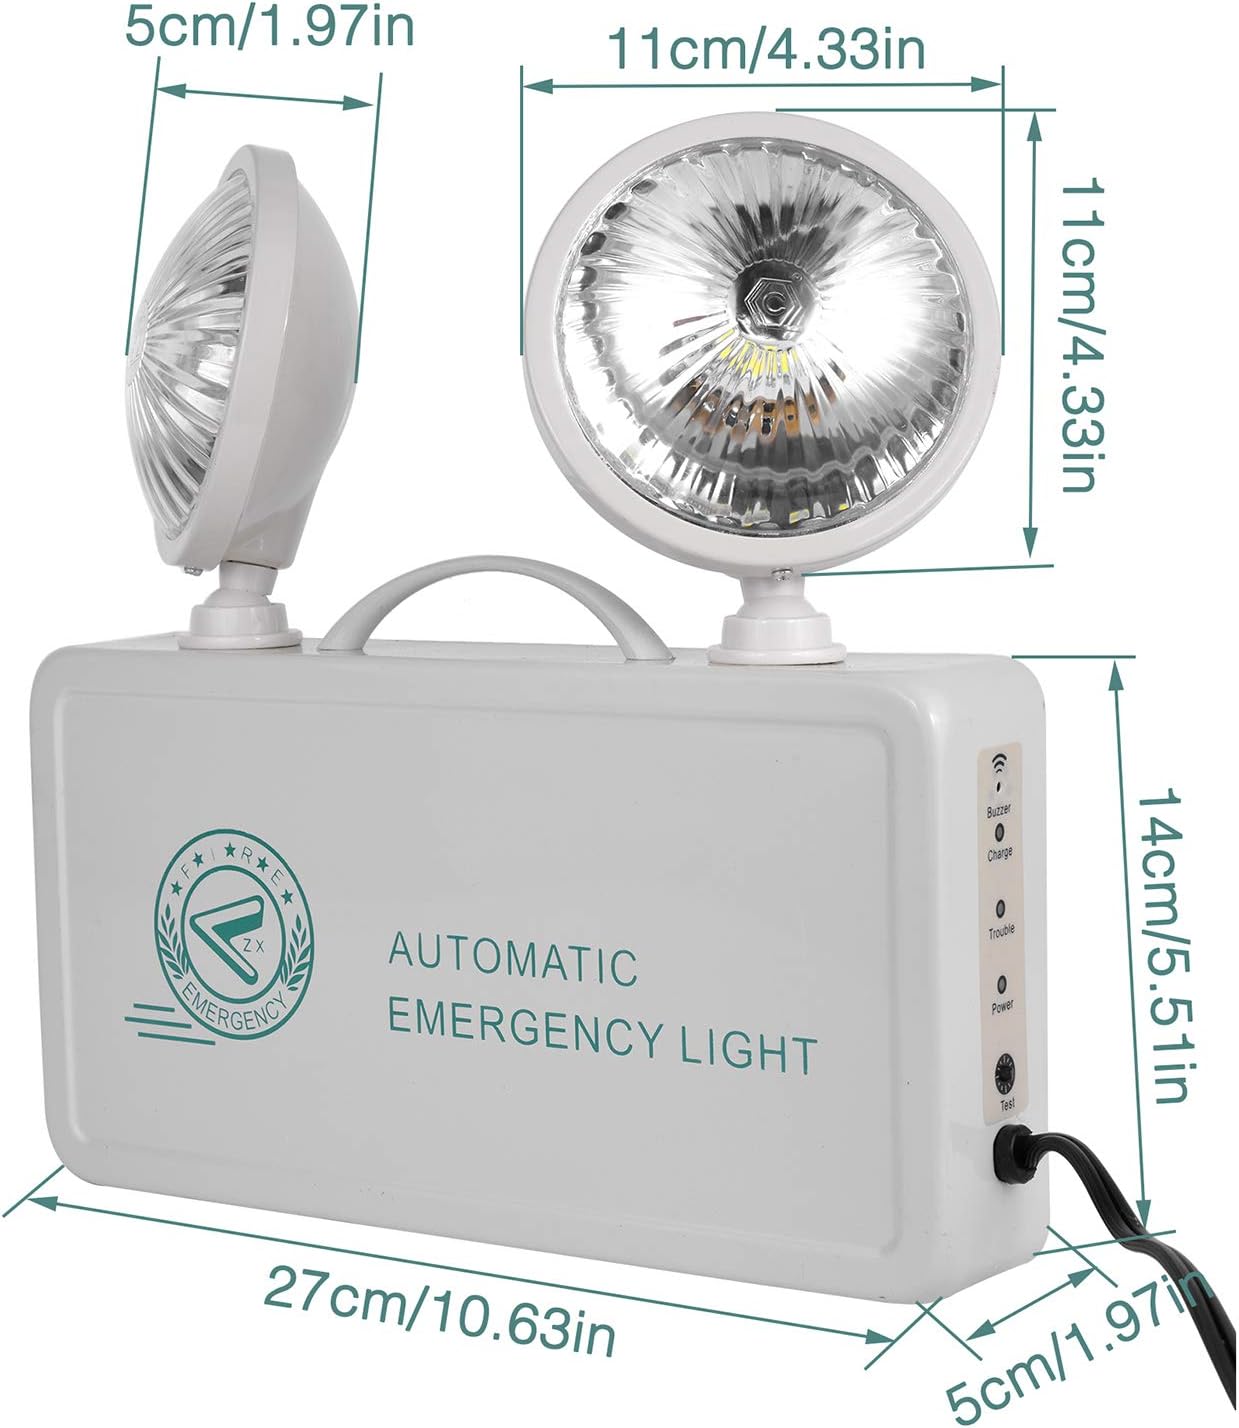 OTYTY Emergency Lights for Home Power Failure, LED Emergency Lights with Battery Backup, 2 Adjustable Heads Lamp